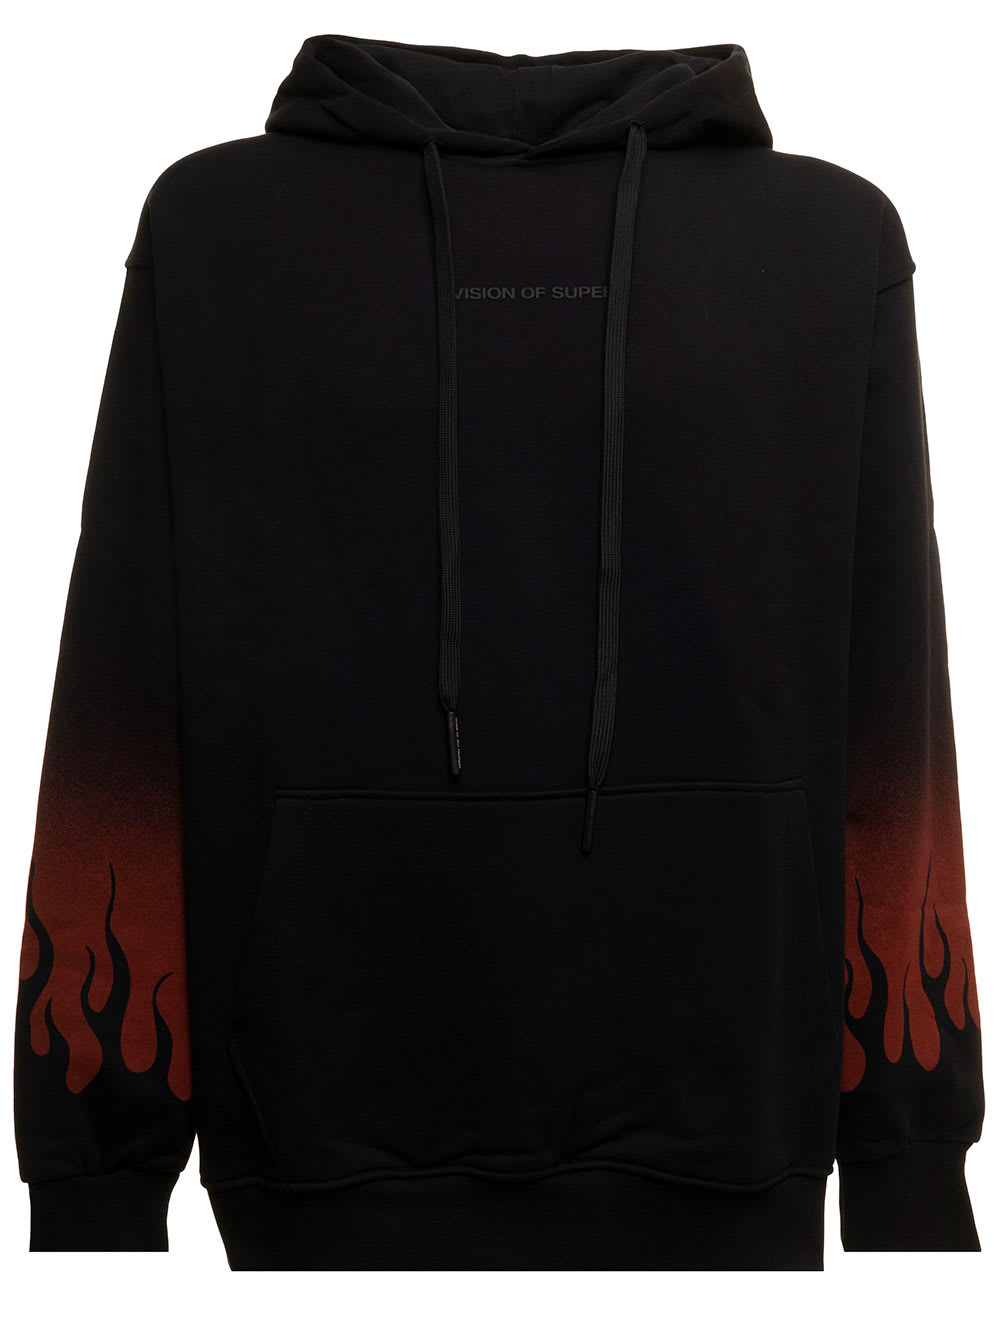 Vision of Super Black Oversize Cotton Hoodie With Flames Man